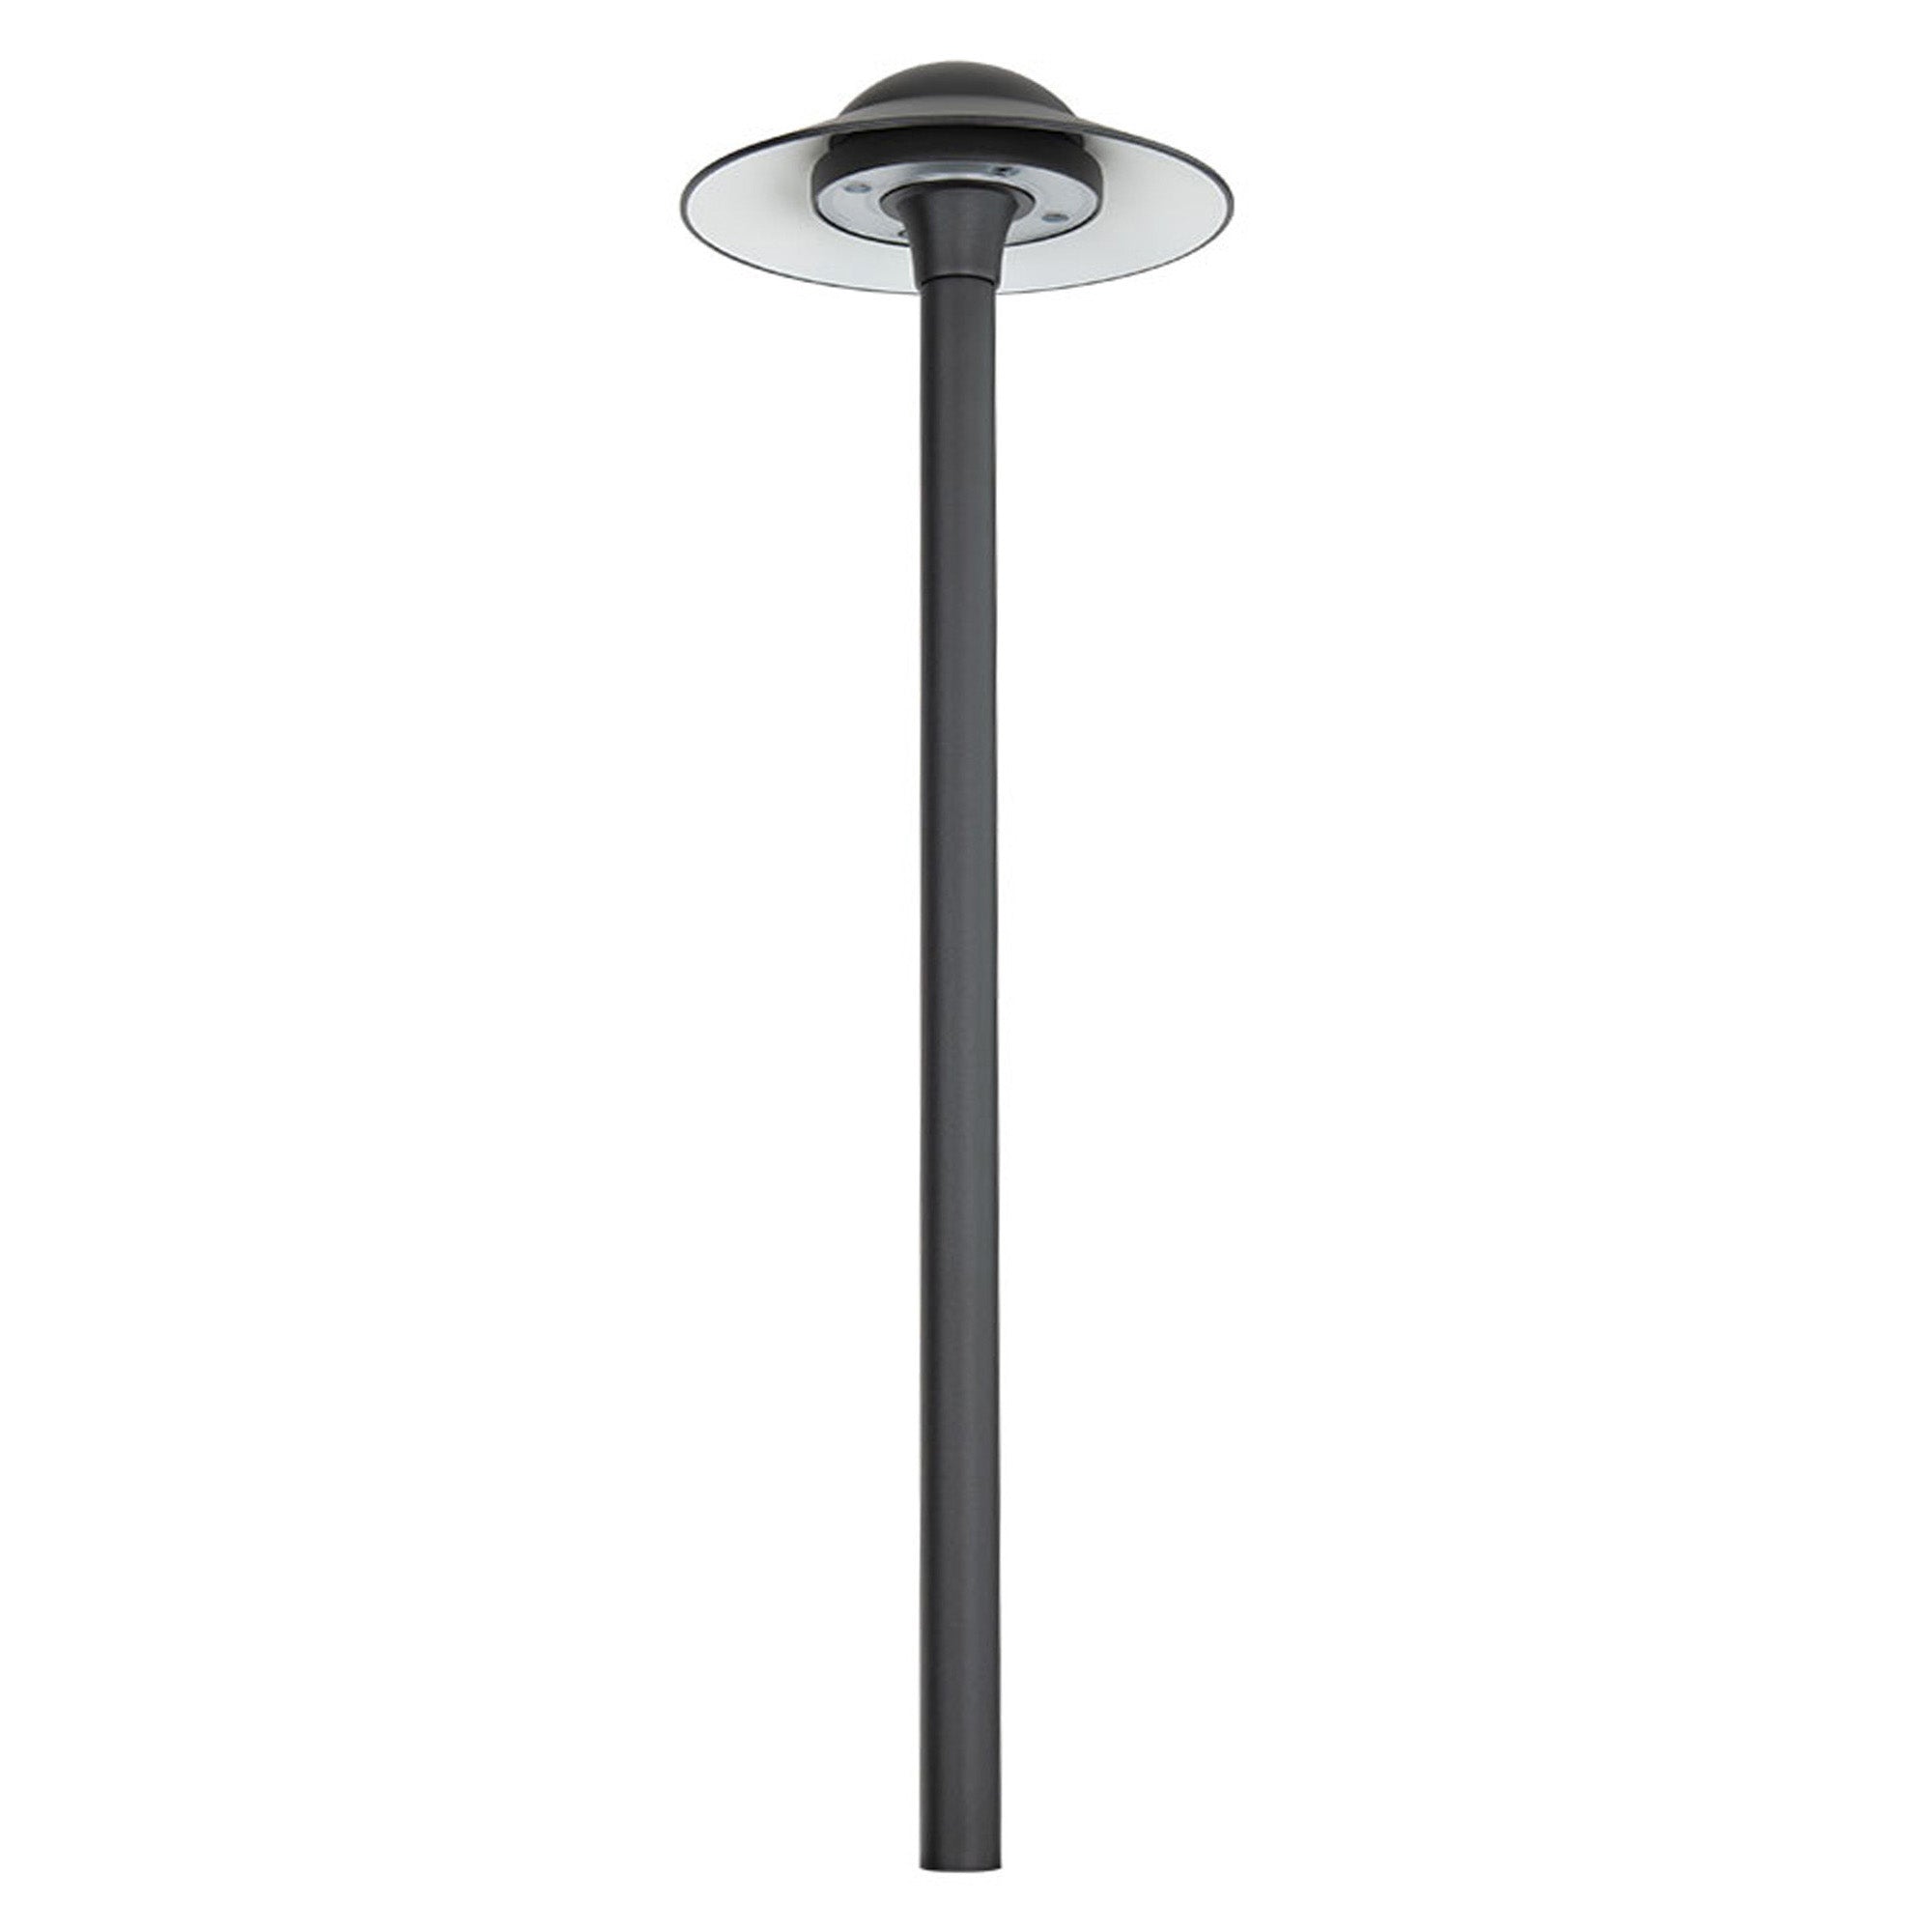 Canopy LED 12V Path and Area Light with 8.5" Round Cap